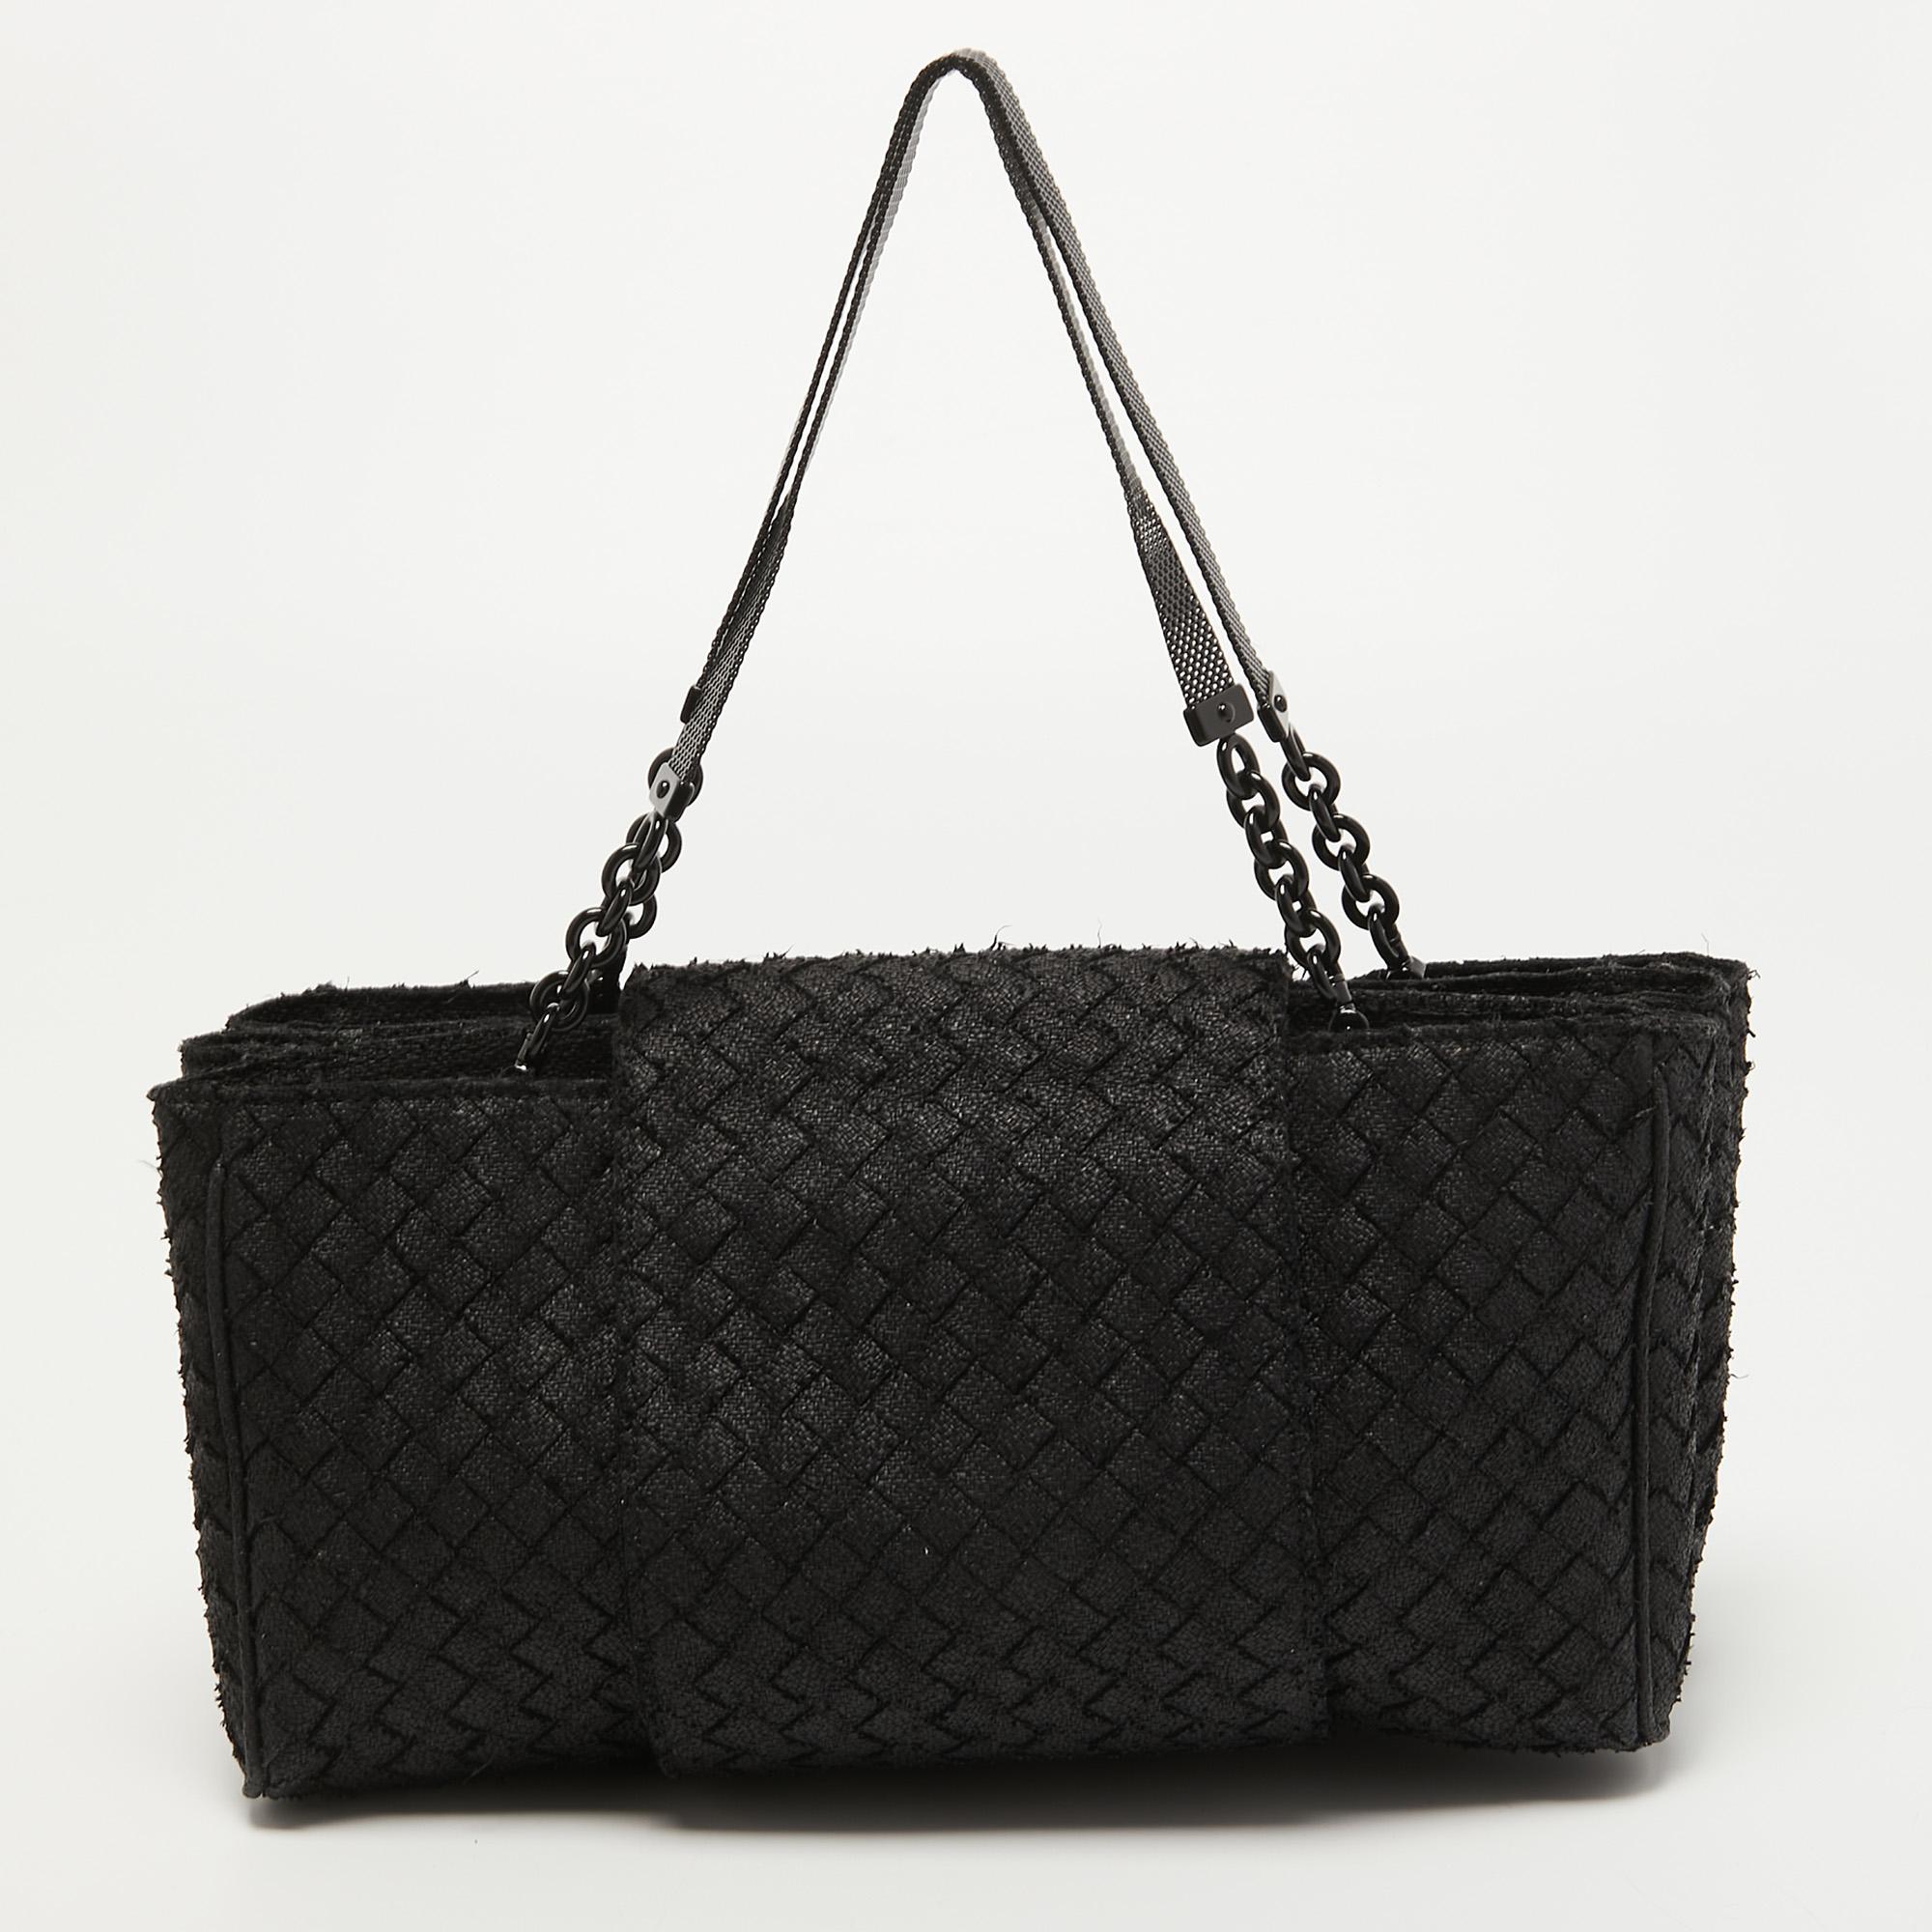 Striking a beautiful balance between essentiality and opulence, this tote from the House of Bottega Veneta ensures that your handbag requirements are taken care of. It is equipped with practical features for all-day ease.

Includes: Original